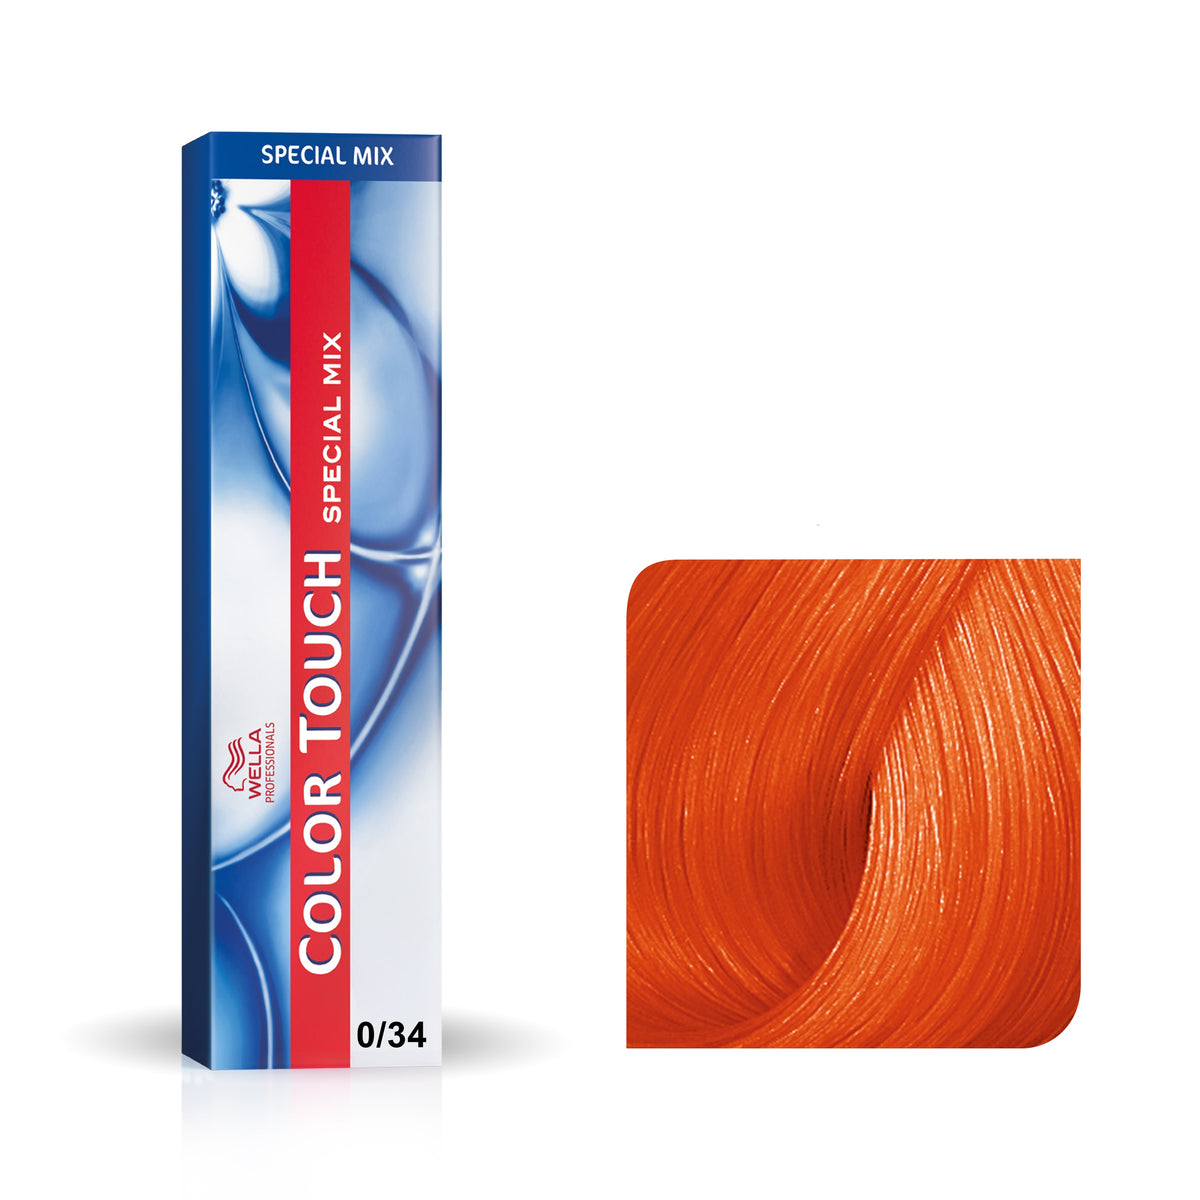 a tube of hair color next to an orange box